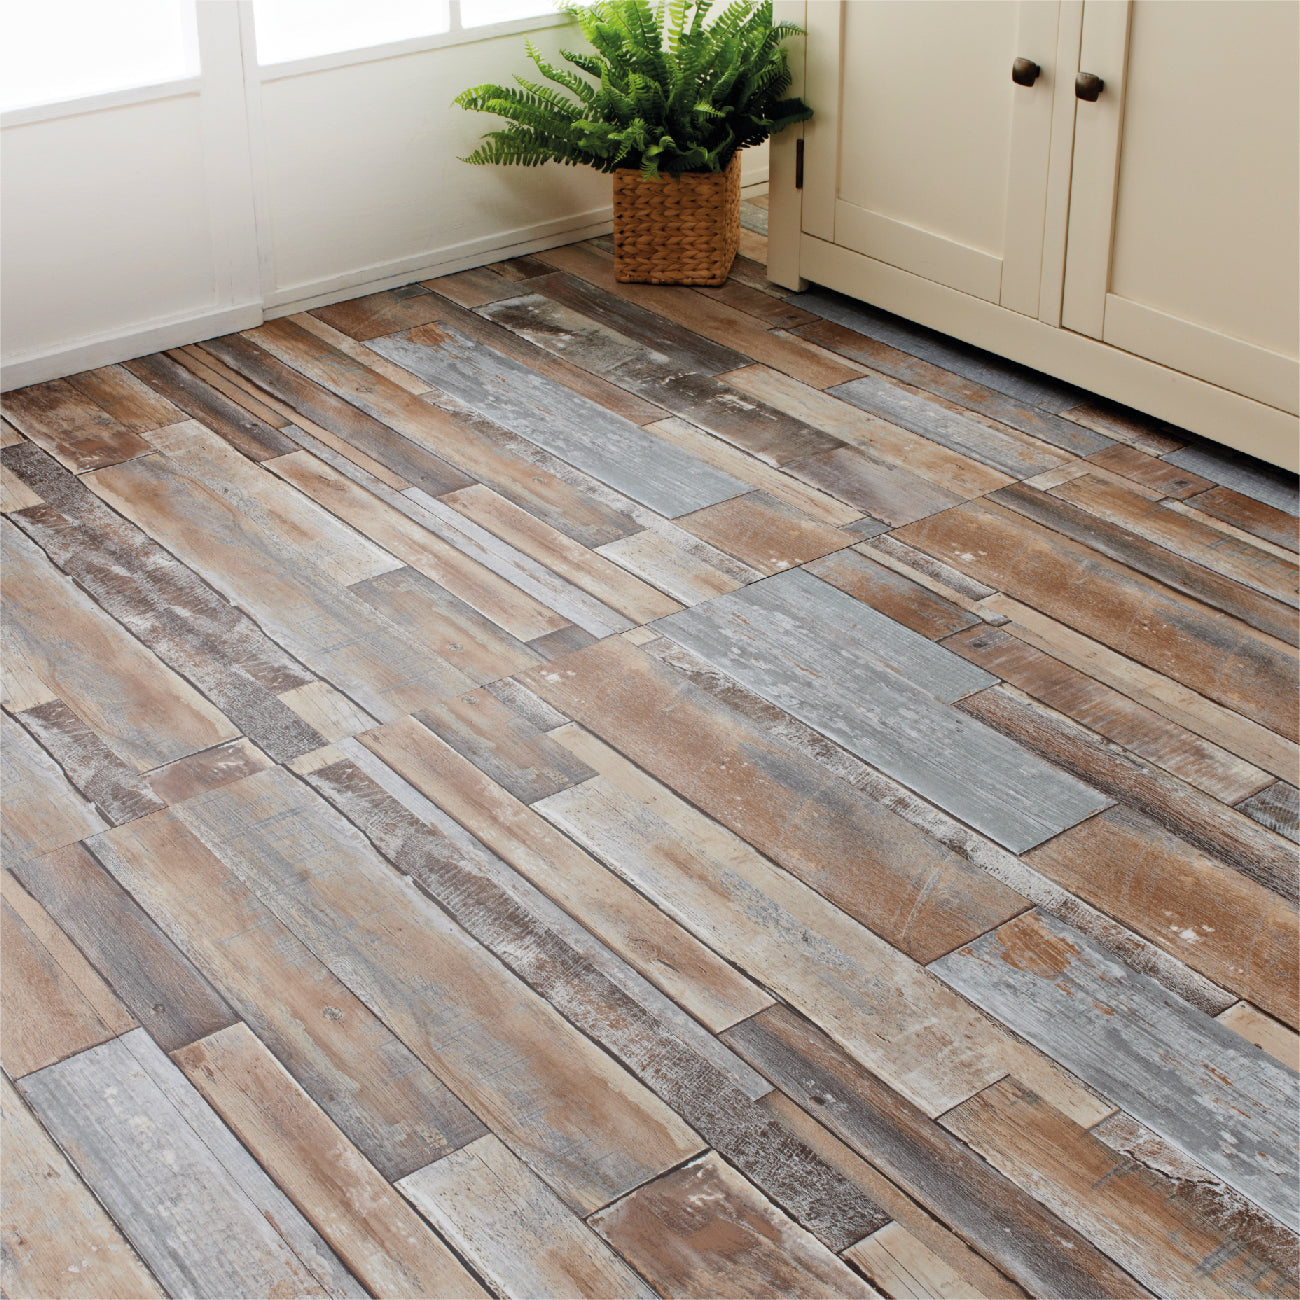 Rustic Wood Effect Planks A